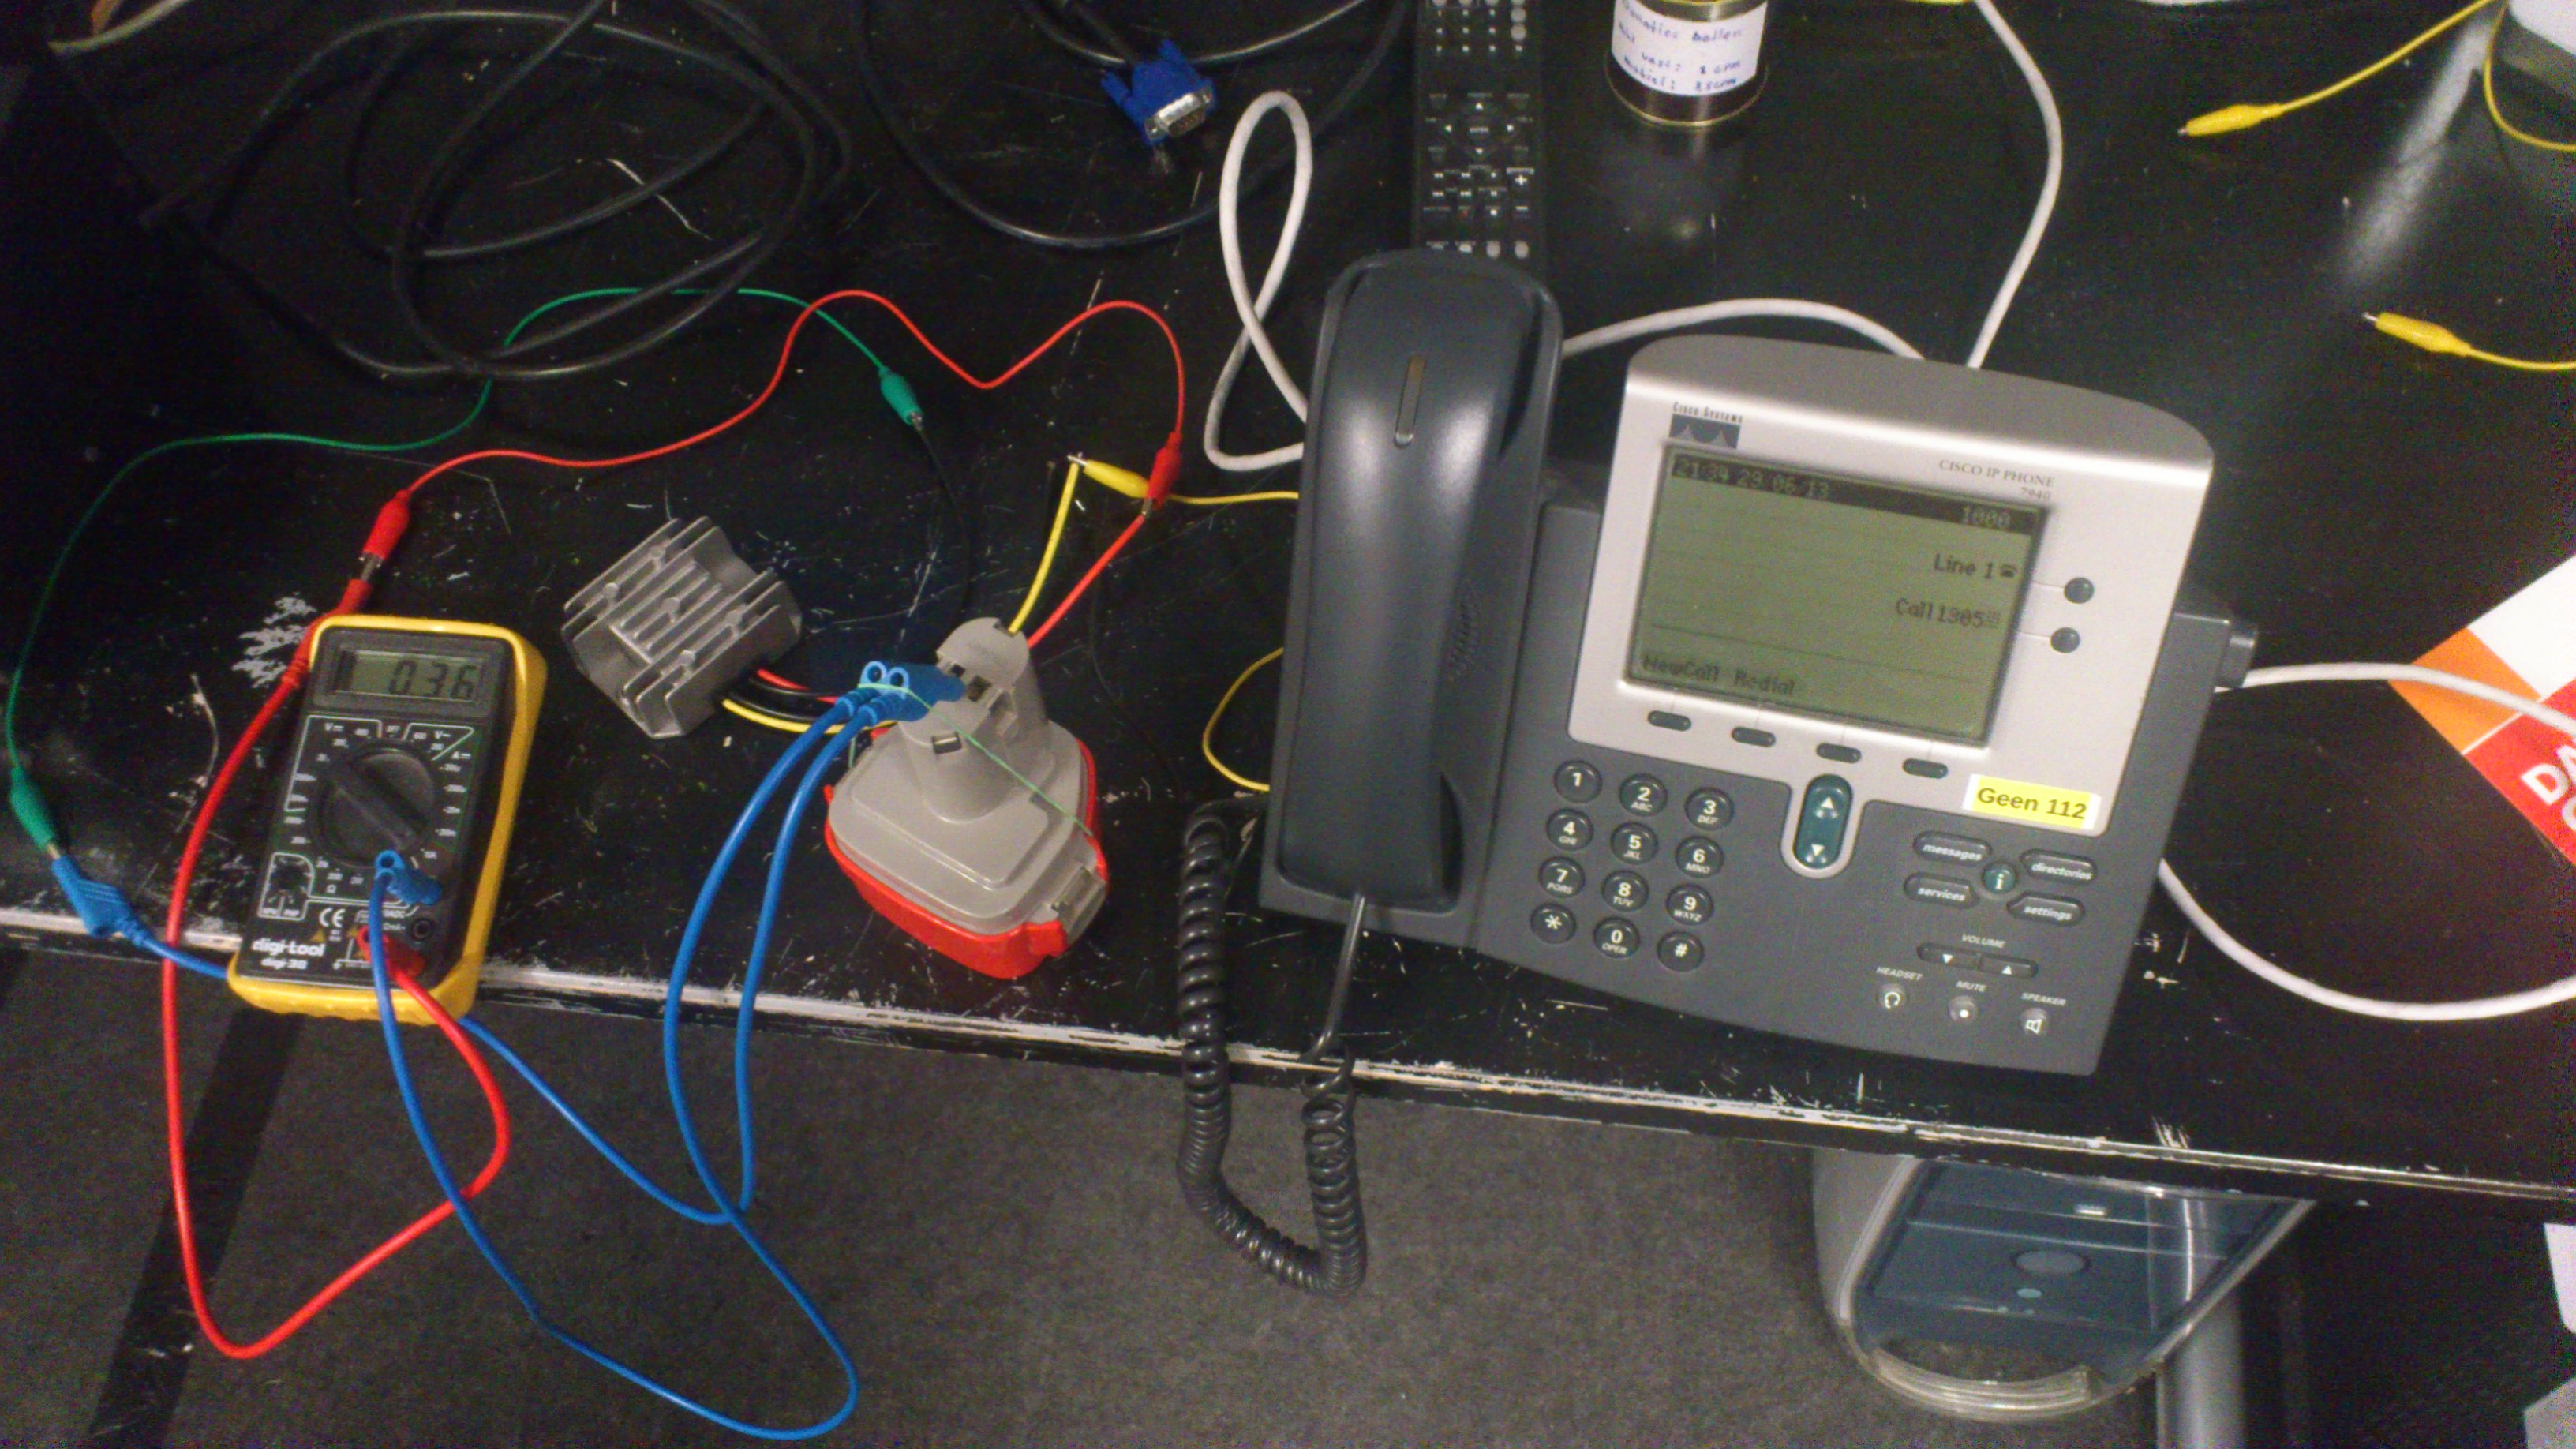 Cisco CP7940 running on a drill battery pack, shows 0.36A at approximately 12V